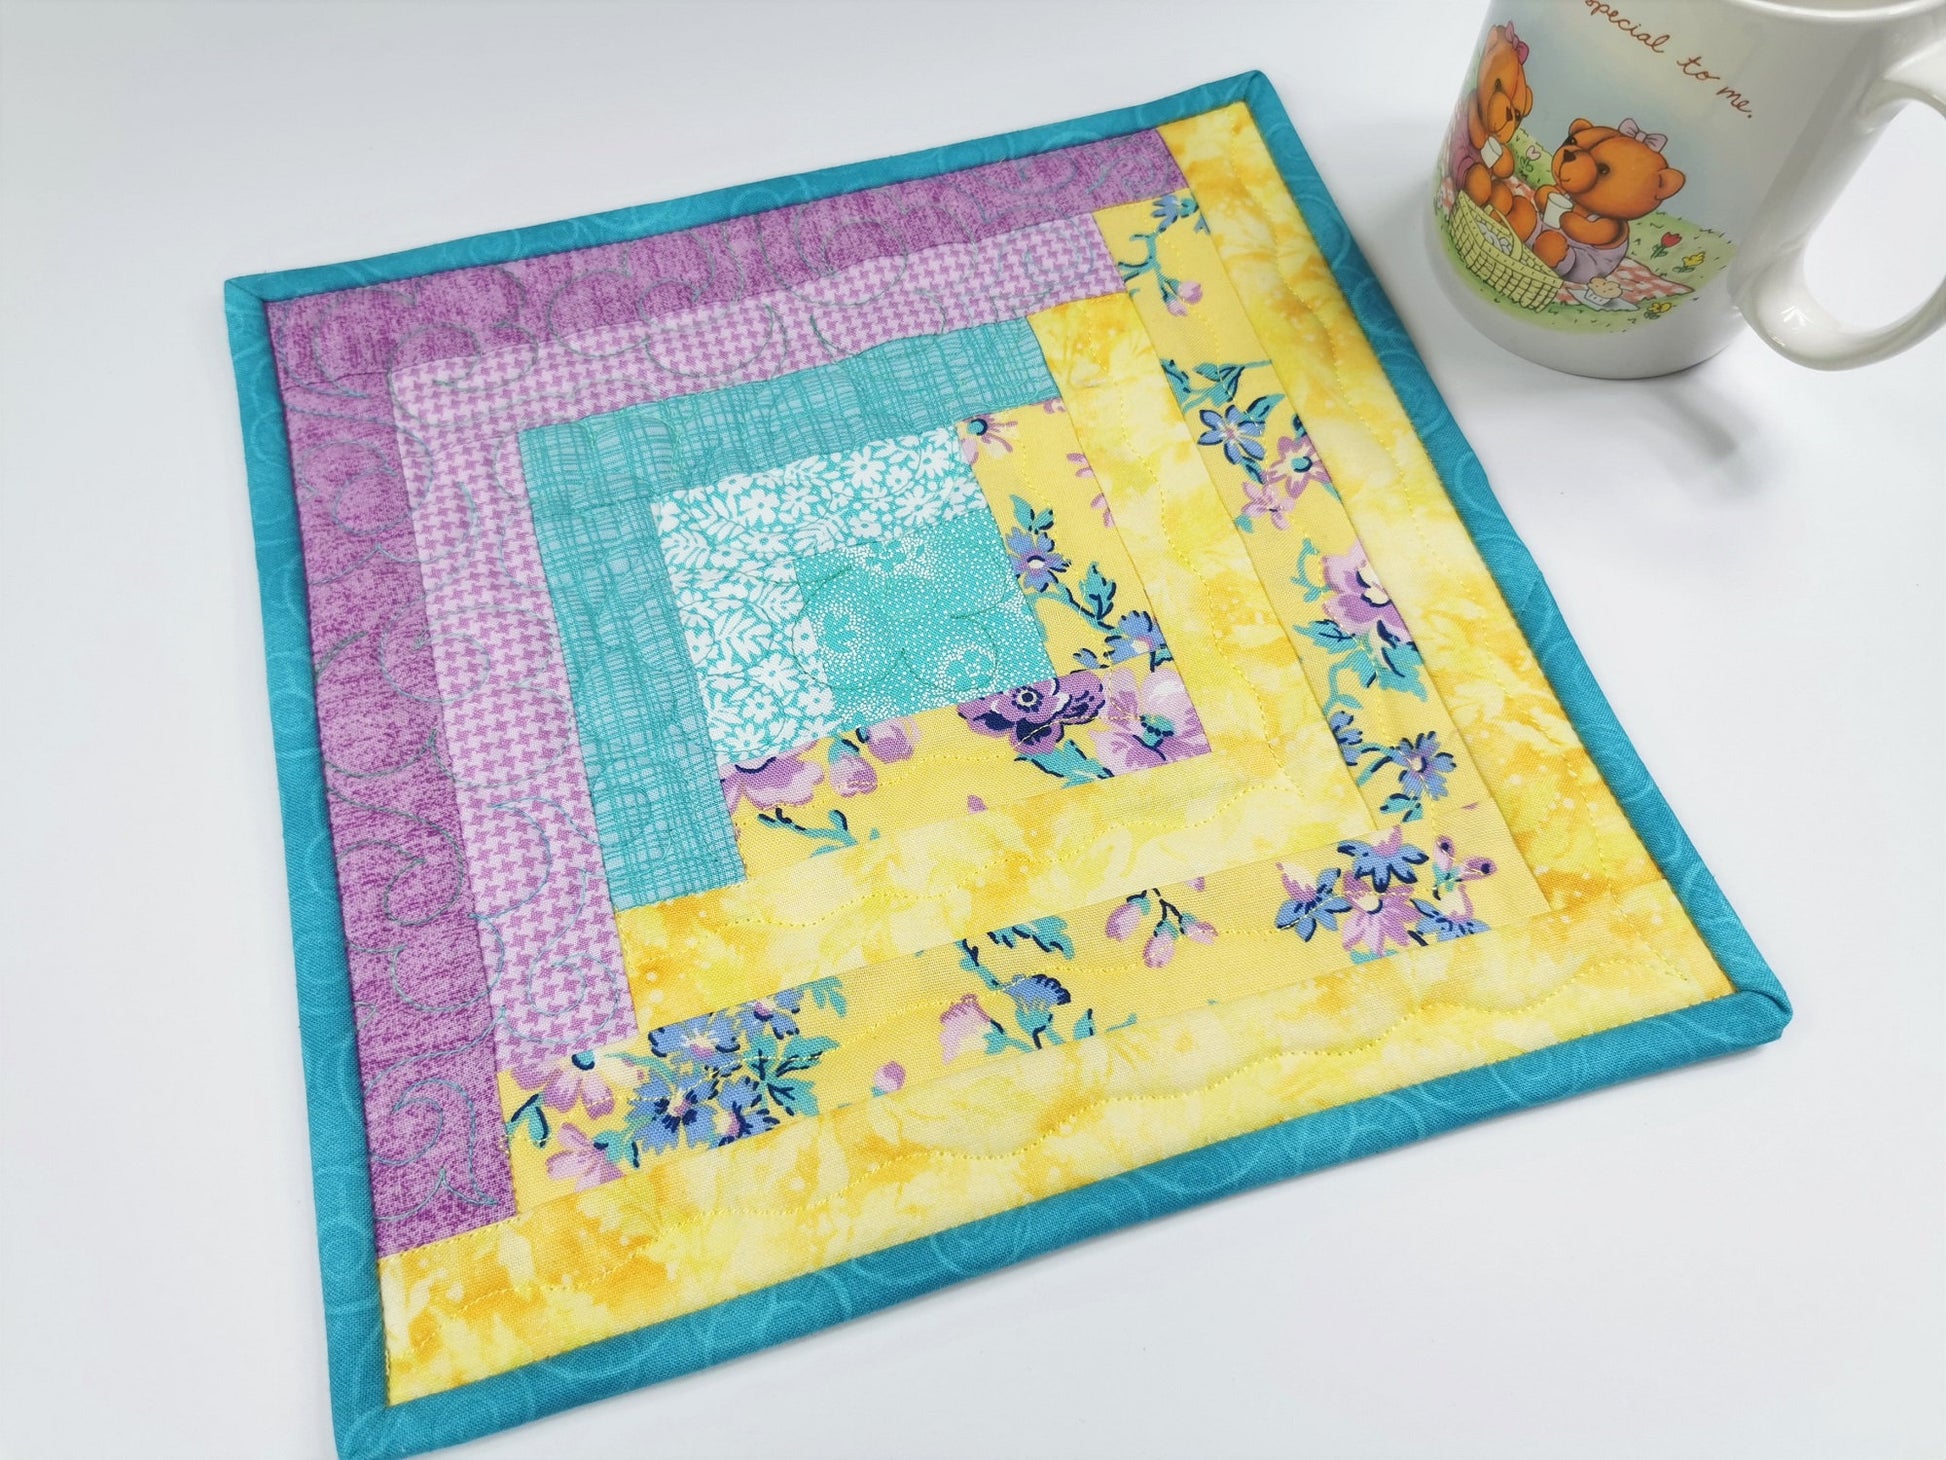 This quilted mug rug feels like Easter and spring. Yellow, teal and light purple fabrics are pretty together.